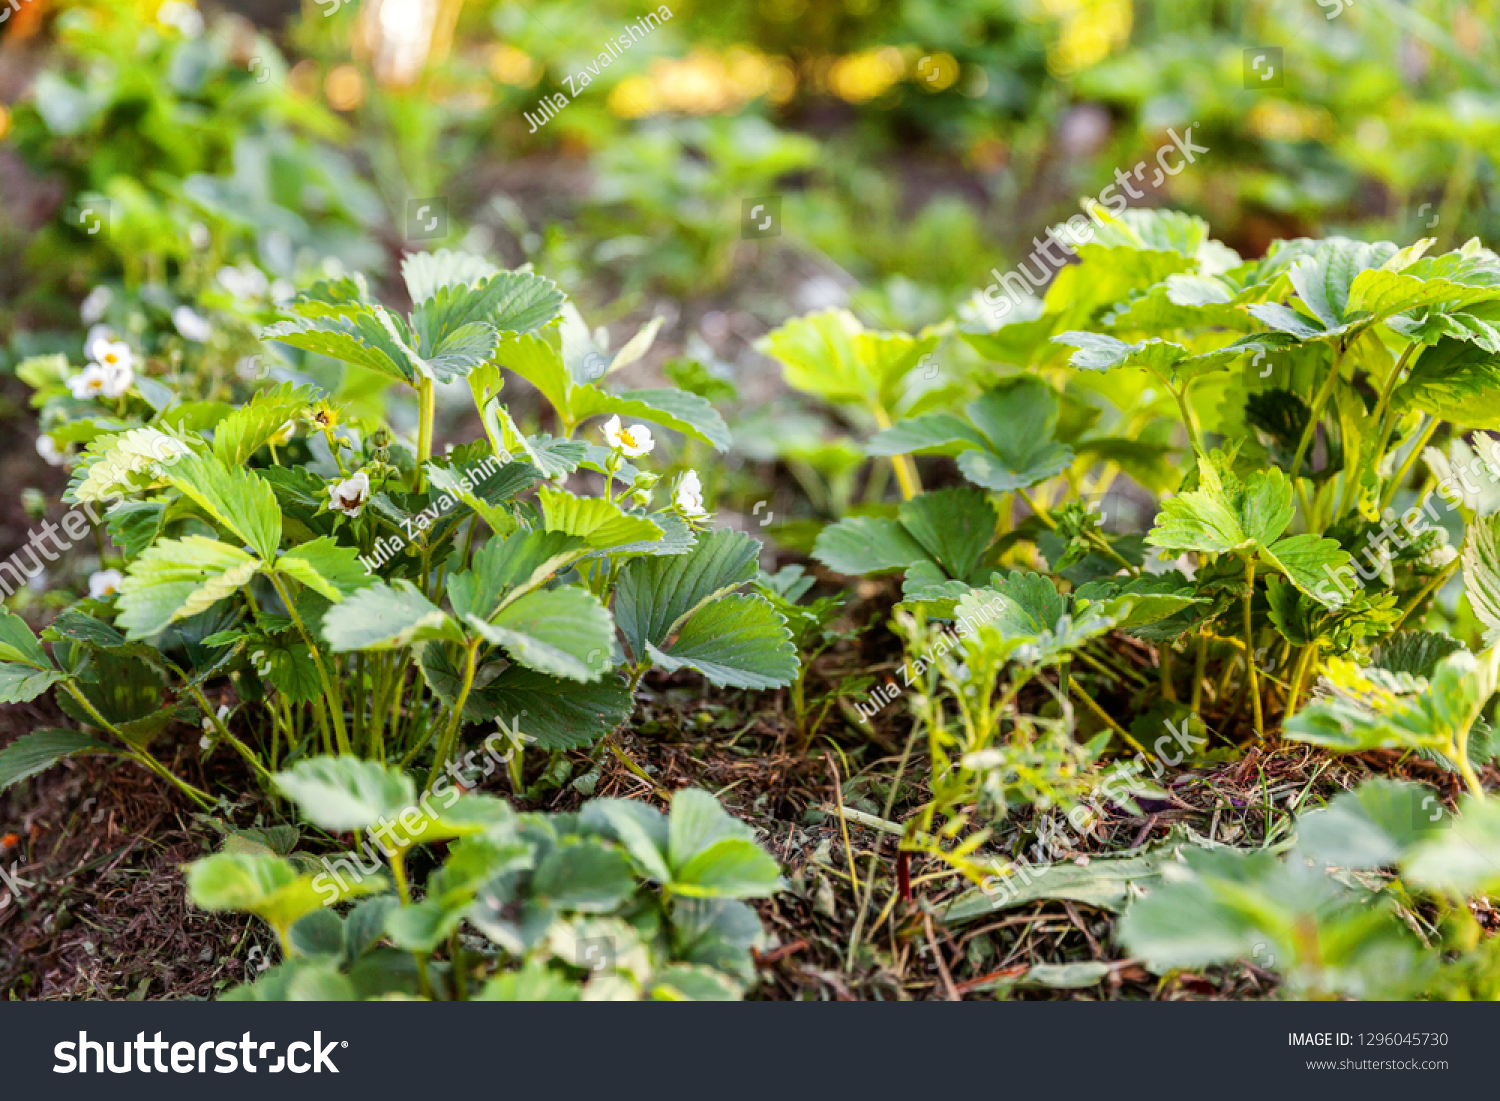 Industrial cultivation of strawberries. Bush of strawberry with flower in spring or summer garden bed. Natural growing of berries on farm. Eco healthy organic food horticulture concept background #1296045730